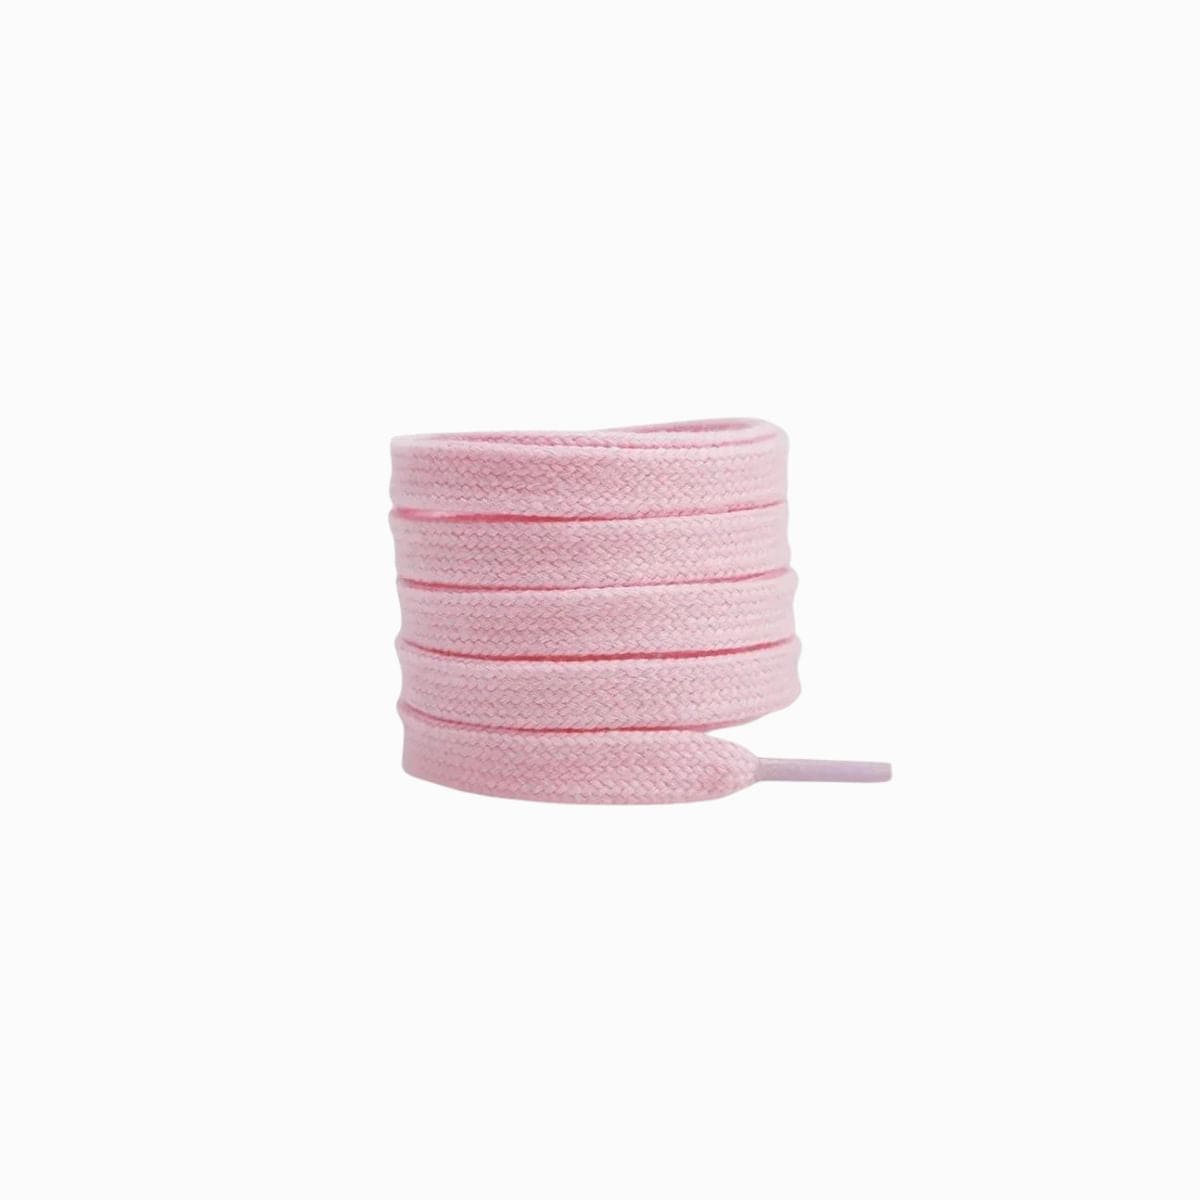 Link Pink Replacement Adidas Shoe Laces for Adidas Gazelle Sneakers by Kicks Shoelaces